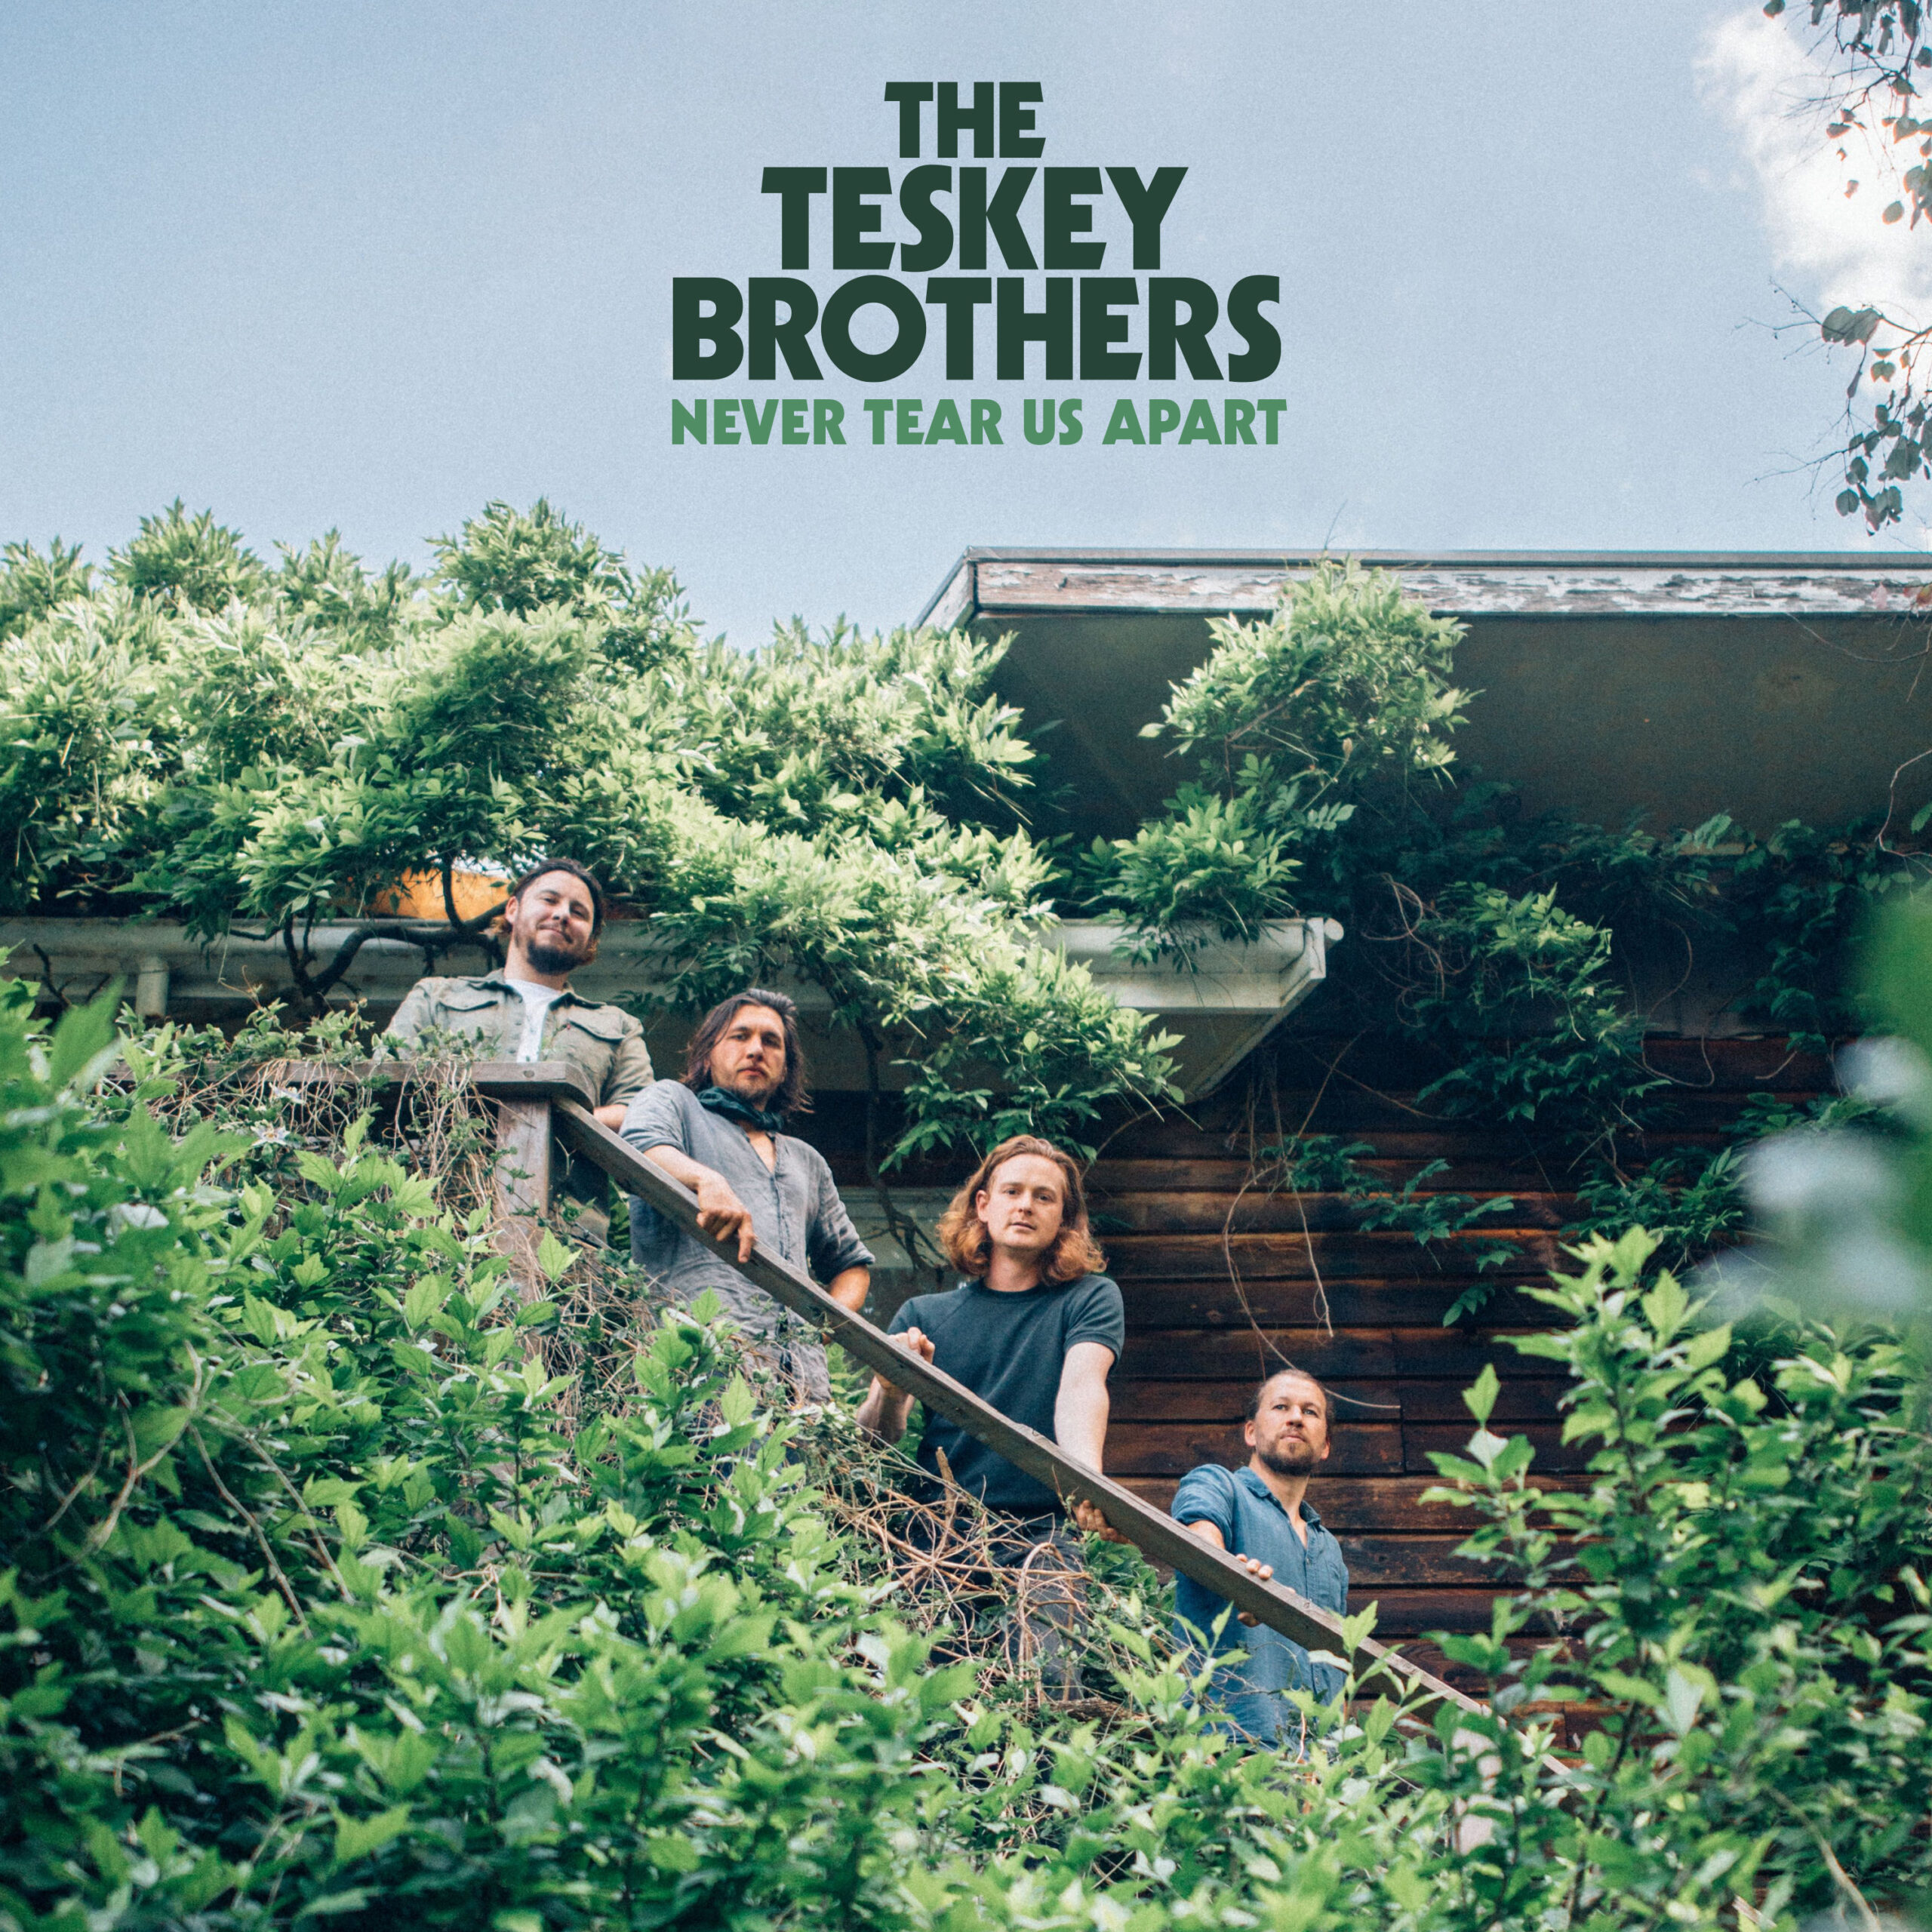 THE TESKEY BROTHERS RELEASE COVER OF ‘NEVER TEAR US APART’ BY INXS + ANNOUNCE MELBOURNE SHOW AT THE FORUM